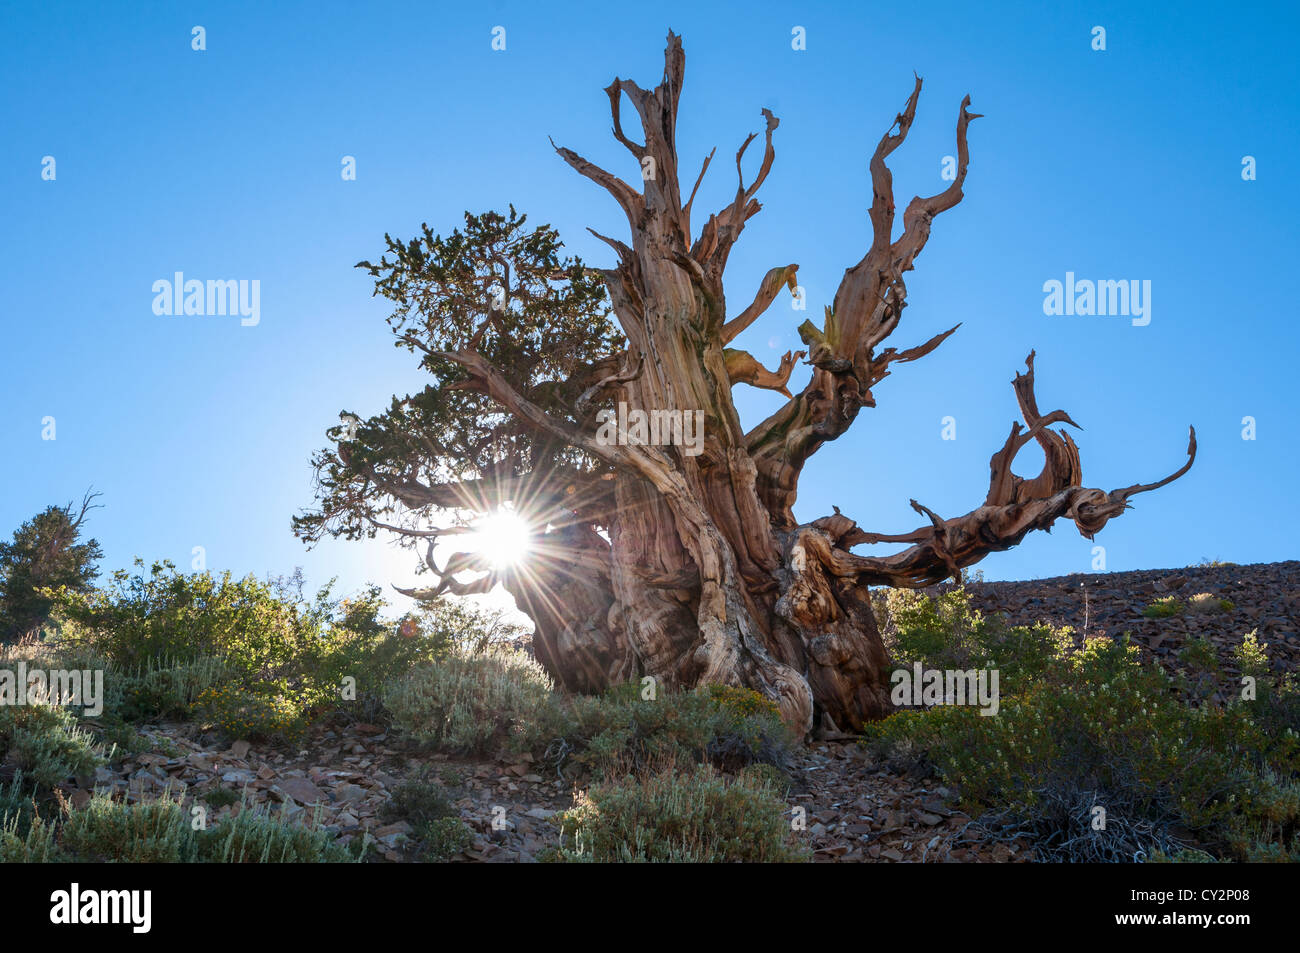 Dramatic view of the Ancient Bristlecone Pine Forest. Stock Photo